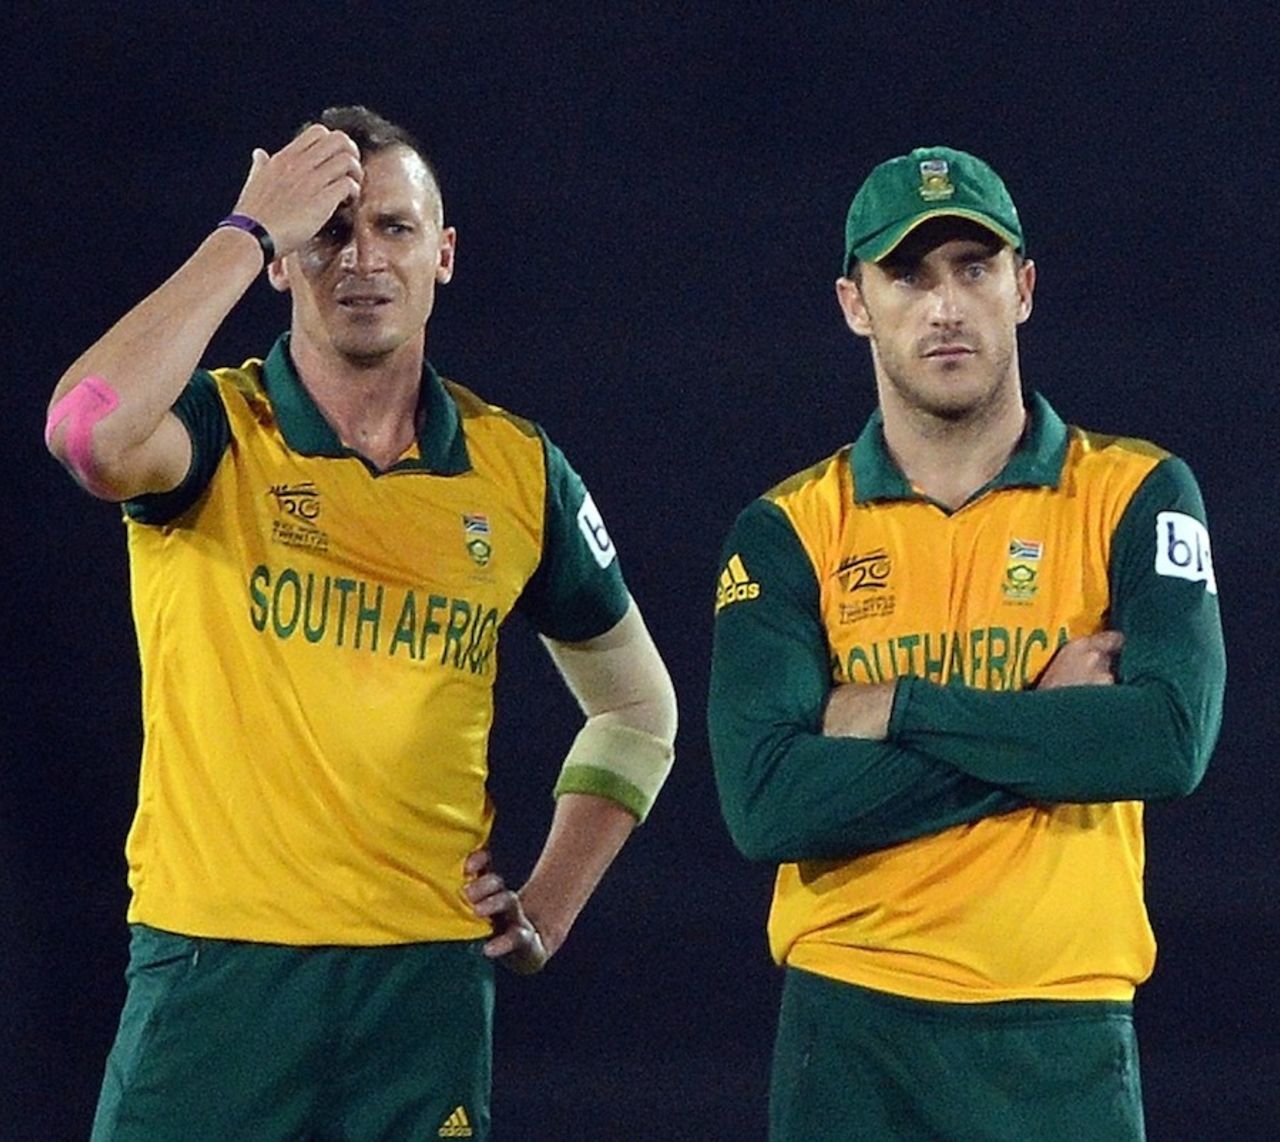 Dale Steyn and Faf du Plessis ran out of ideas, India v South Africa, World T20, semi-final, Mirpur, April 4, 2014